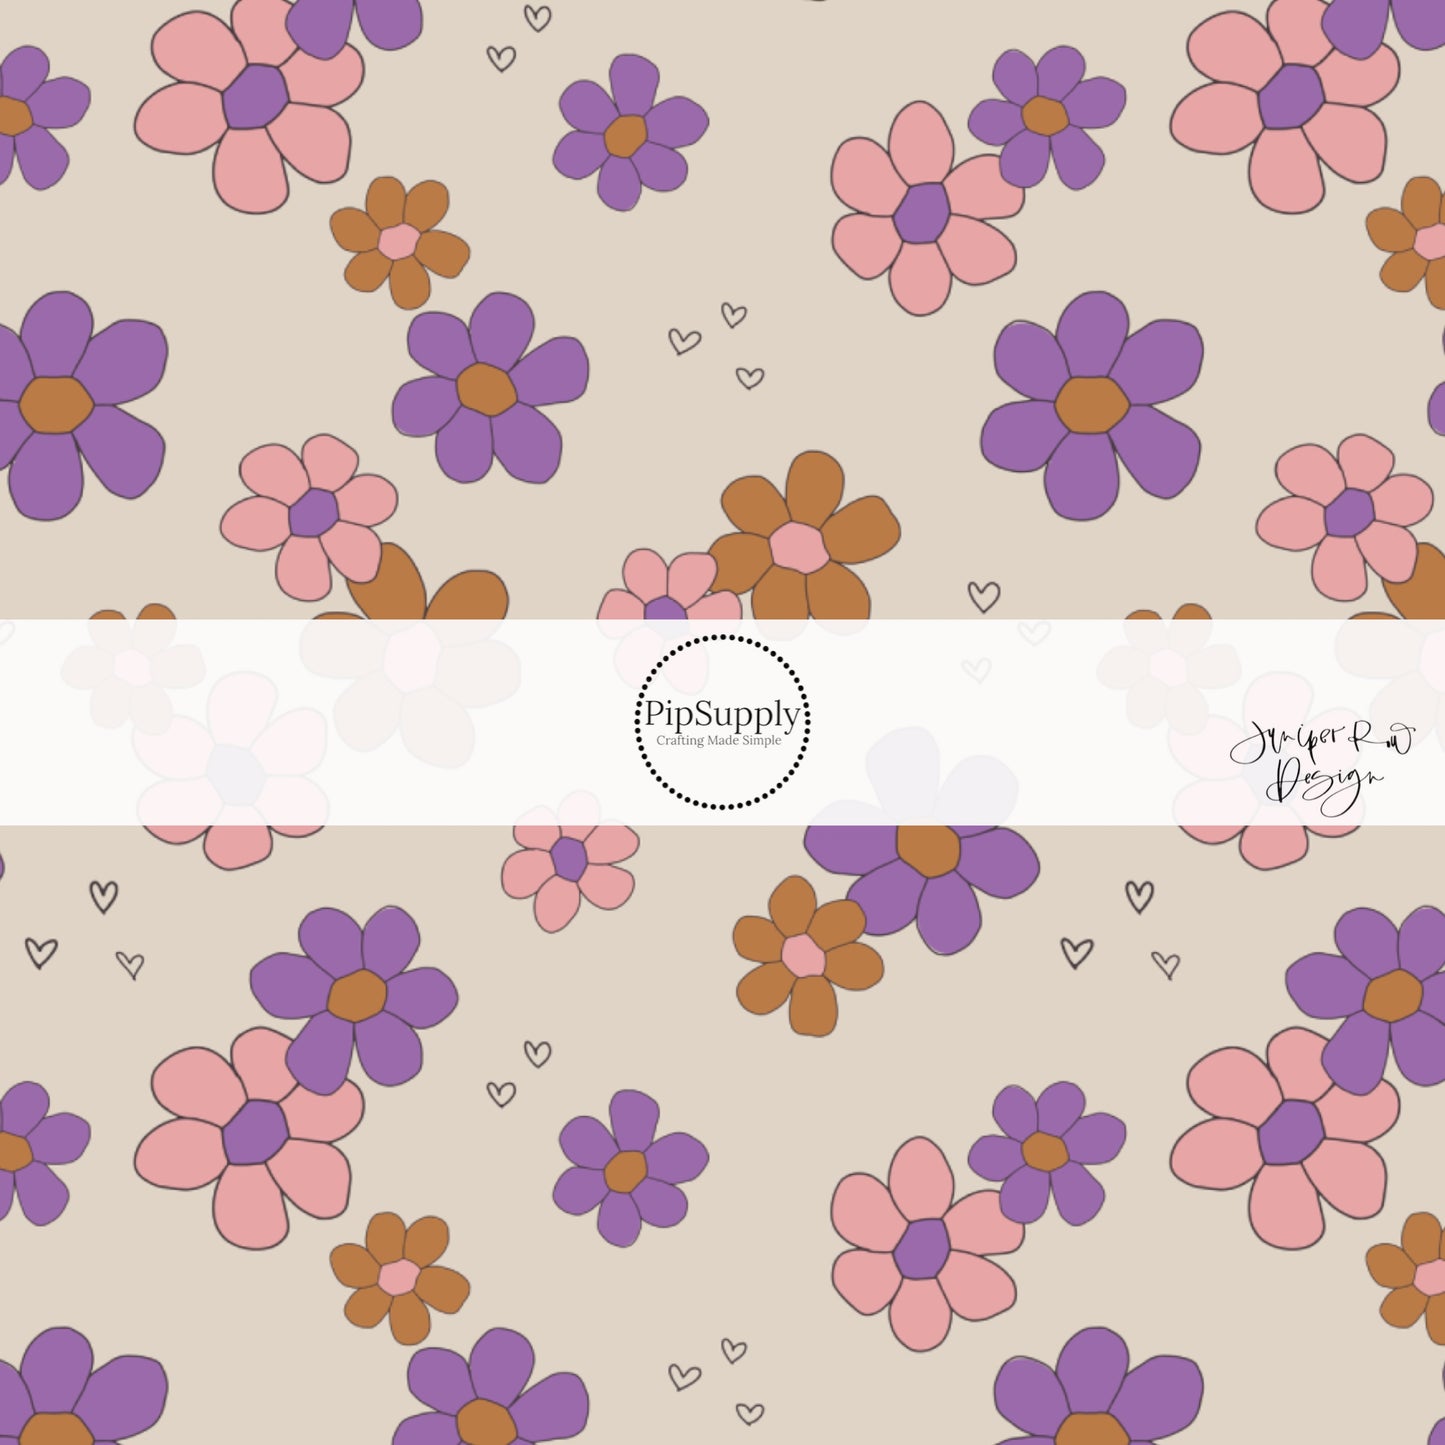 Cream colored fabric swatch with pink, purple, and brown flowers. Fabric by the yard.